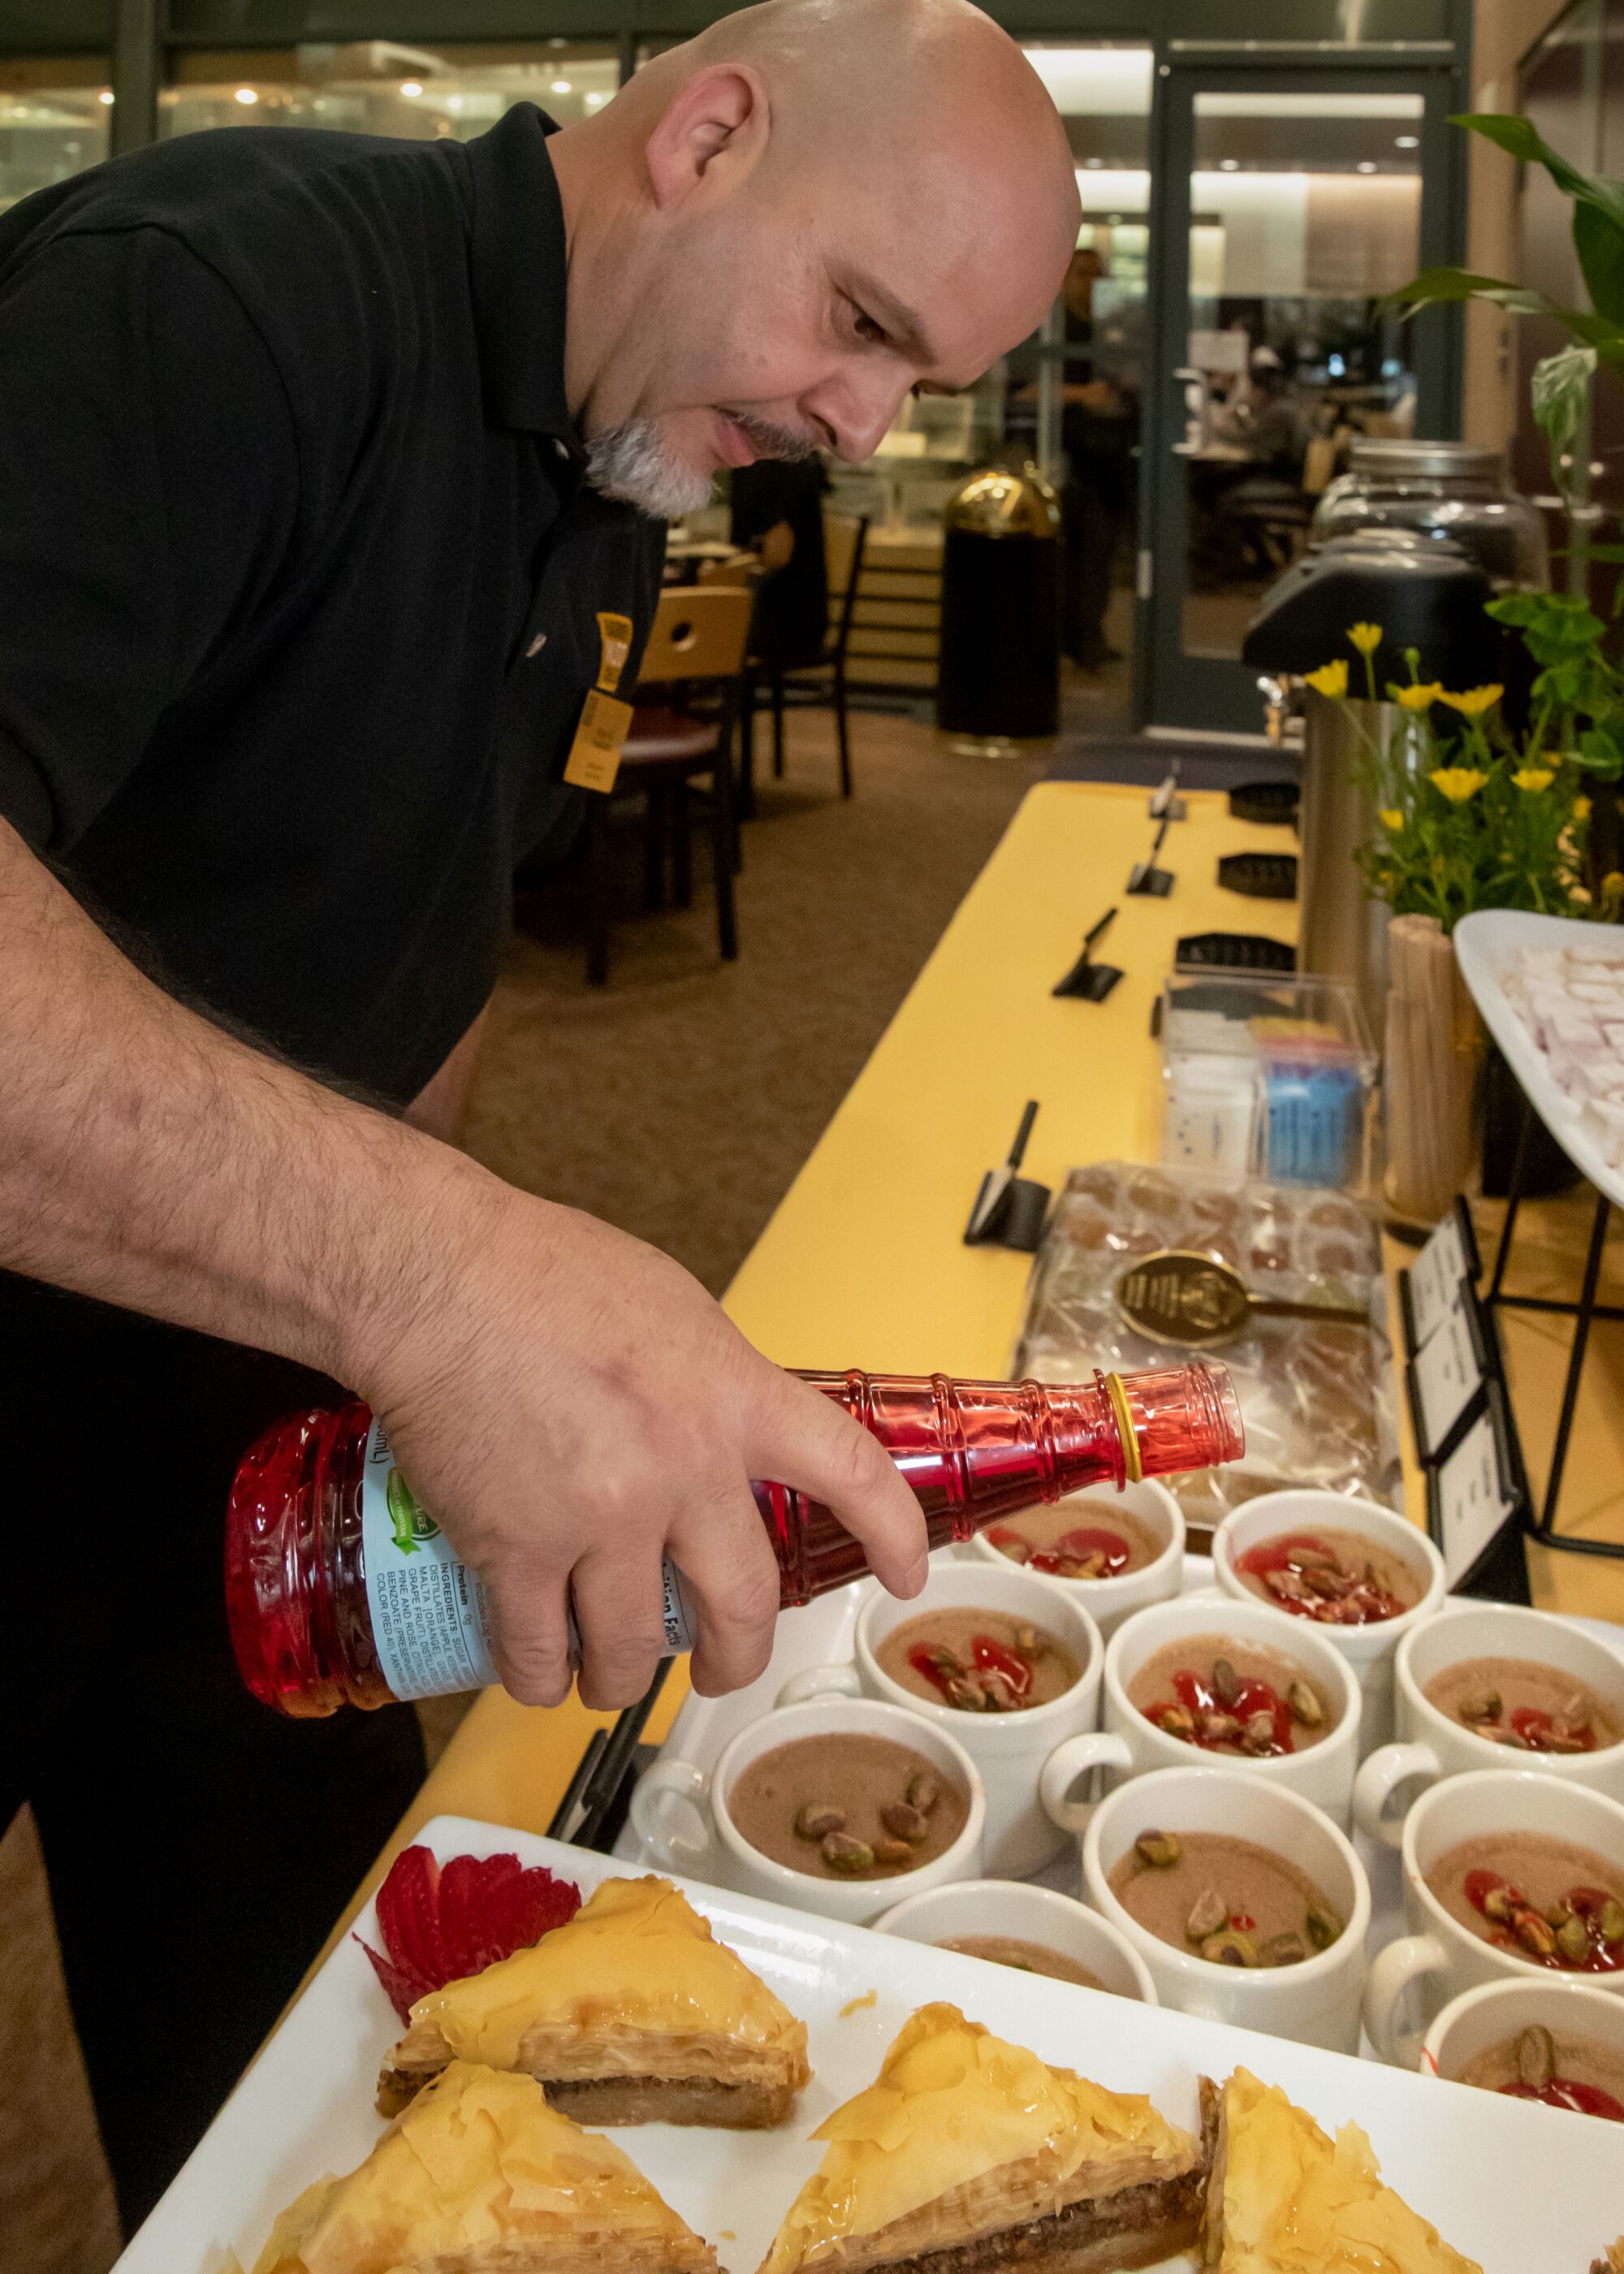 Miguel Ruvalcaba pours a red sauce over cups of brown pudding.